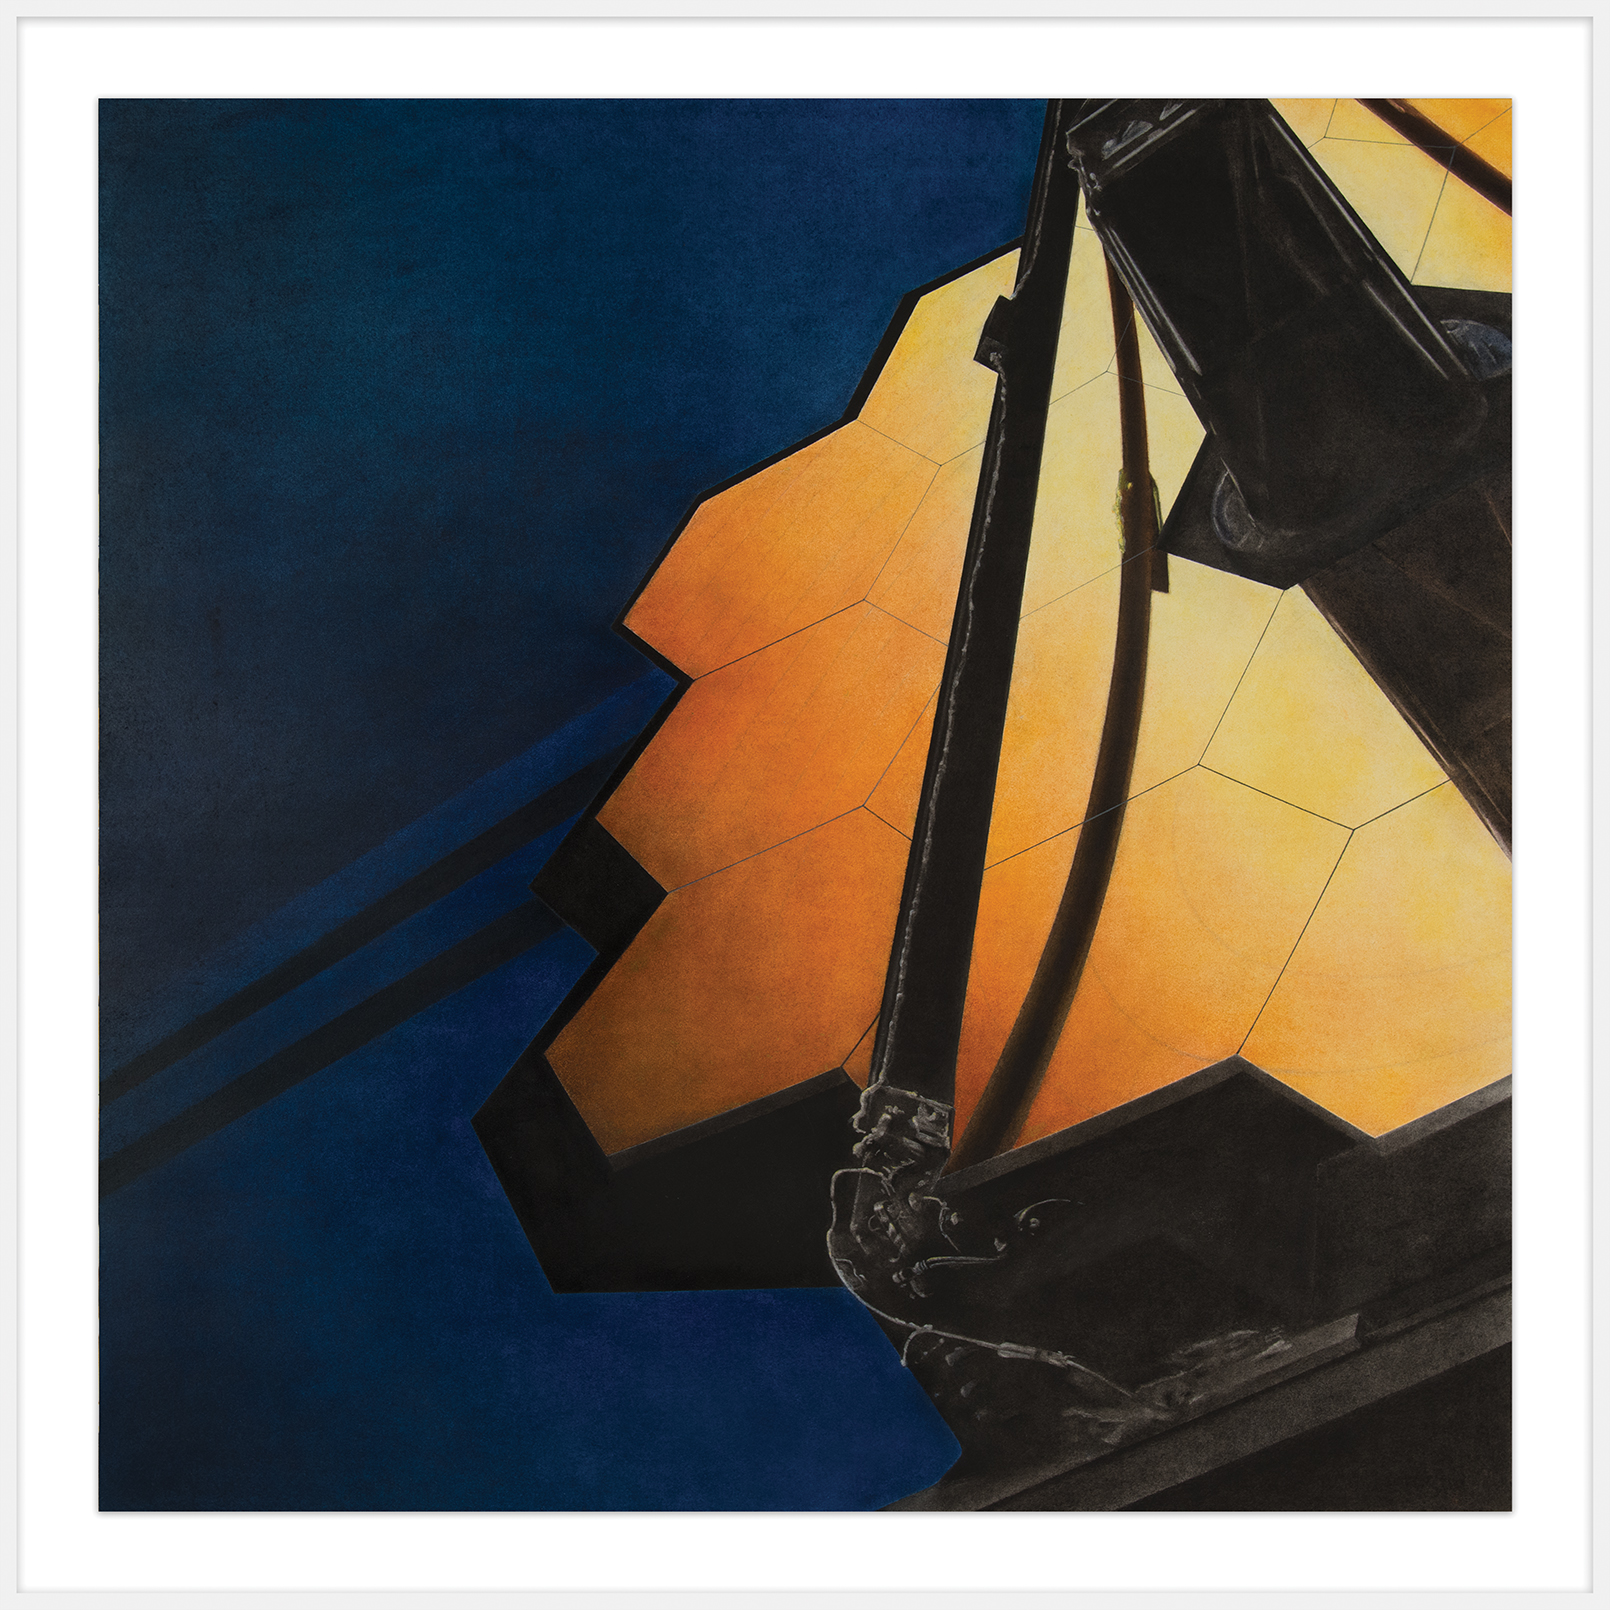 JWST Vertical Primary Mirror, 2017, charcoal and pastel on paper, 49 x 49 inches.